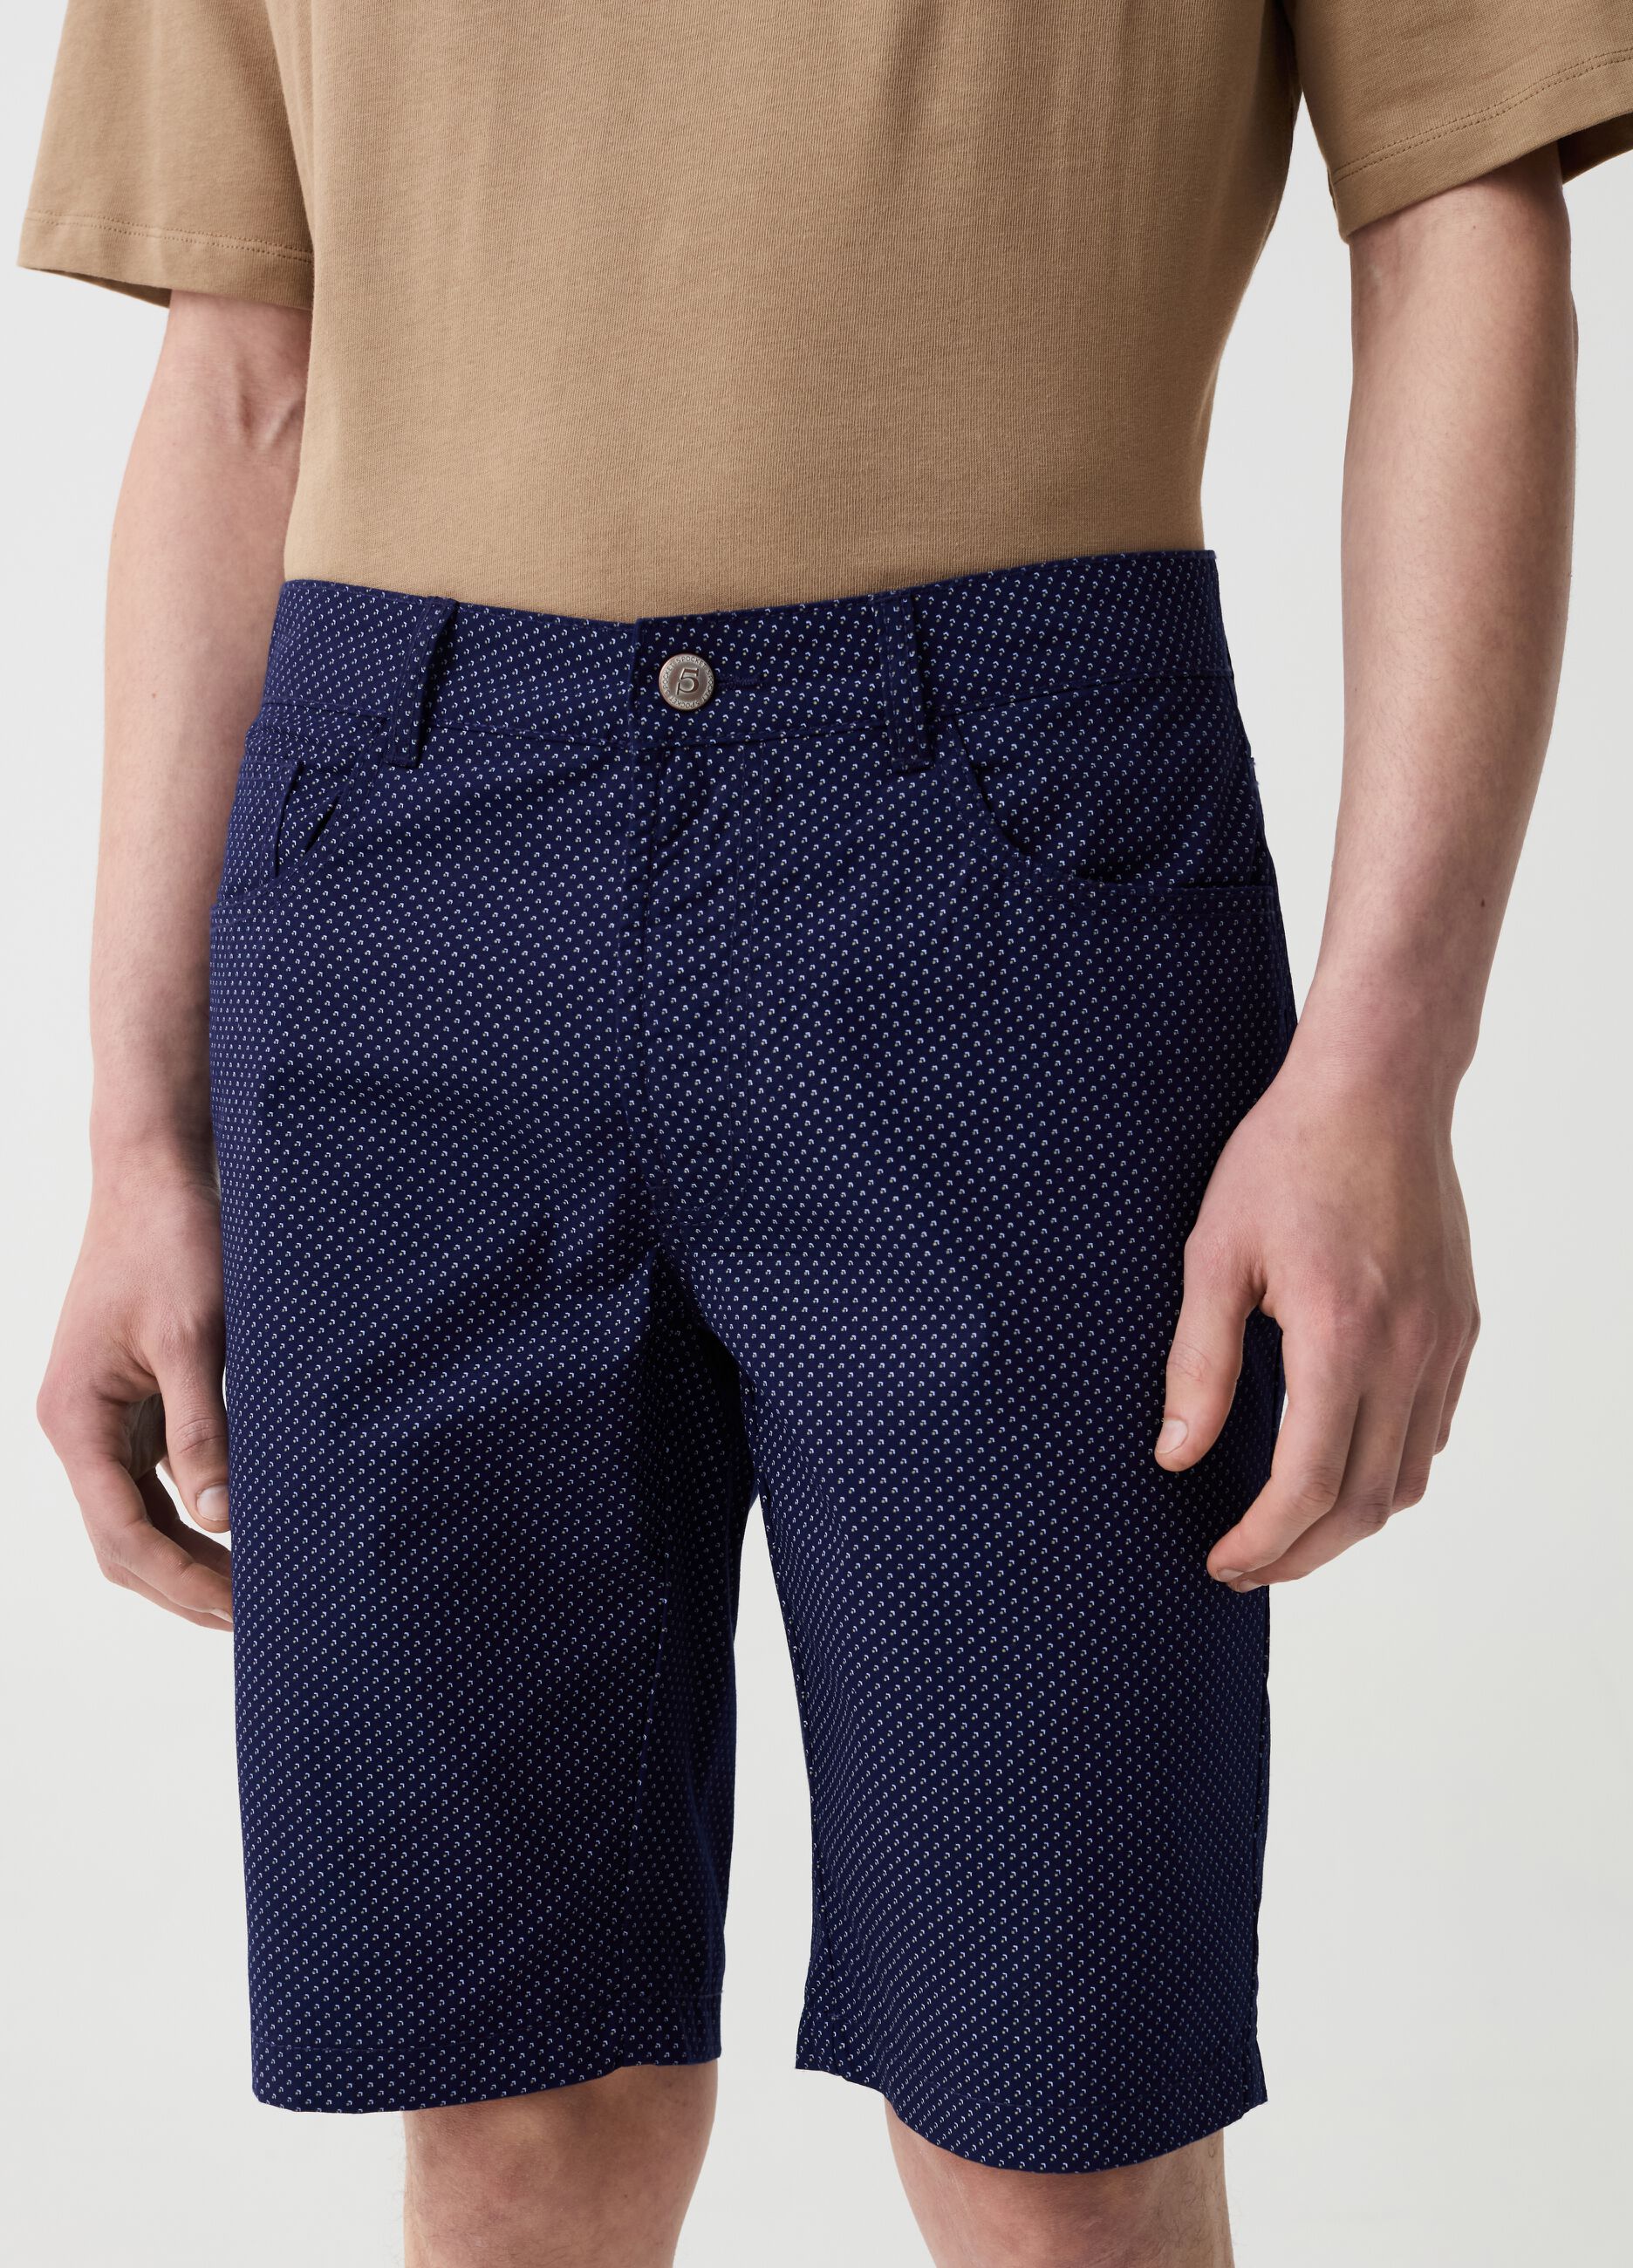 Bermuda shorts with micro pattern and five pockets